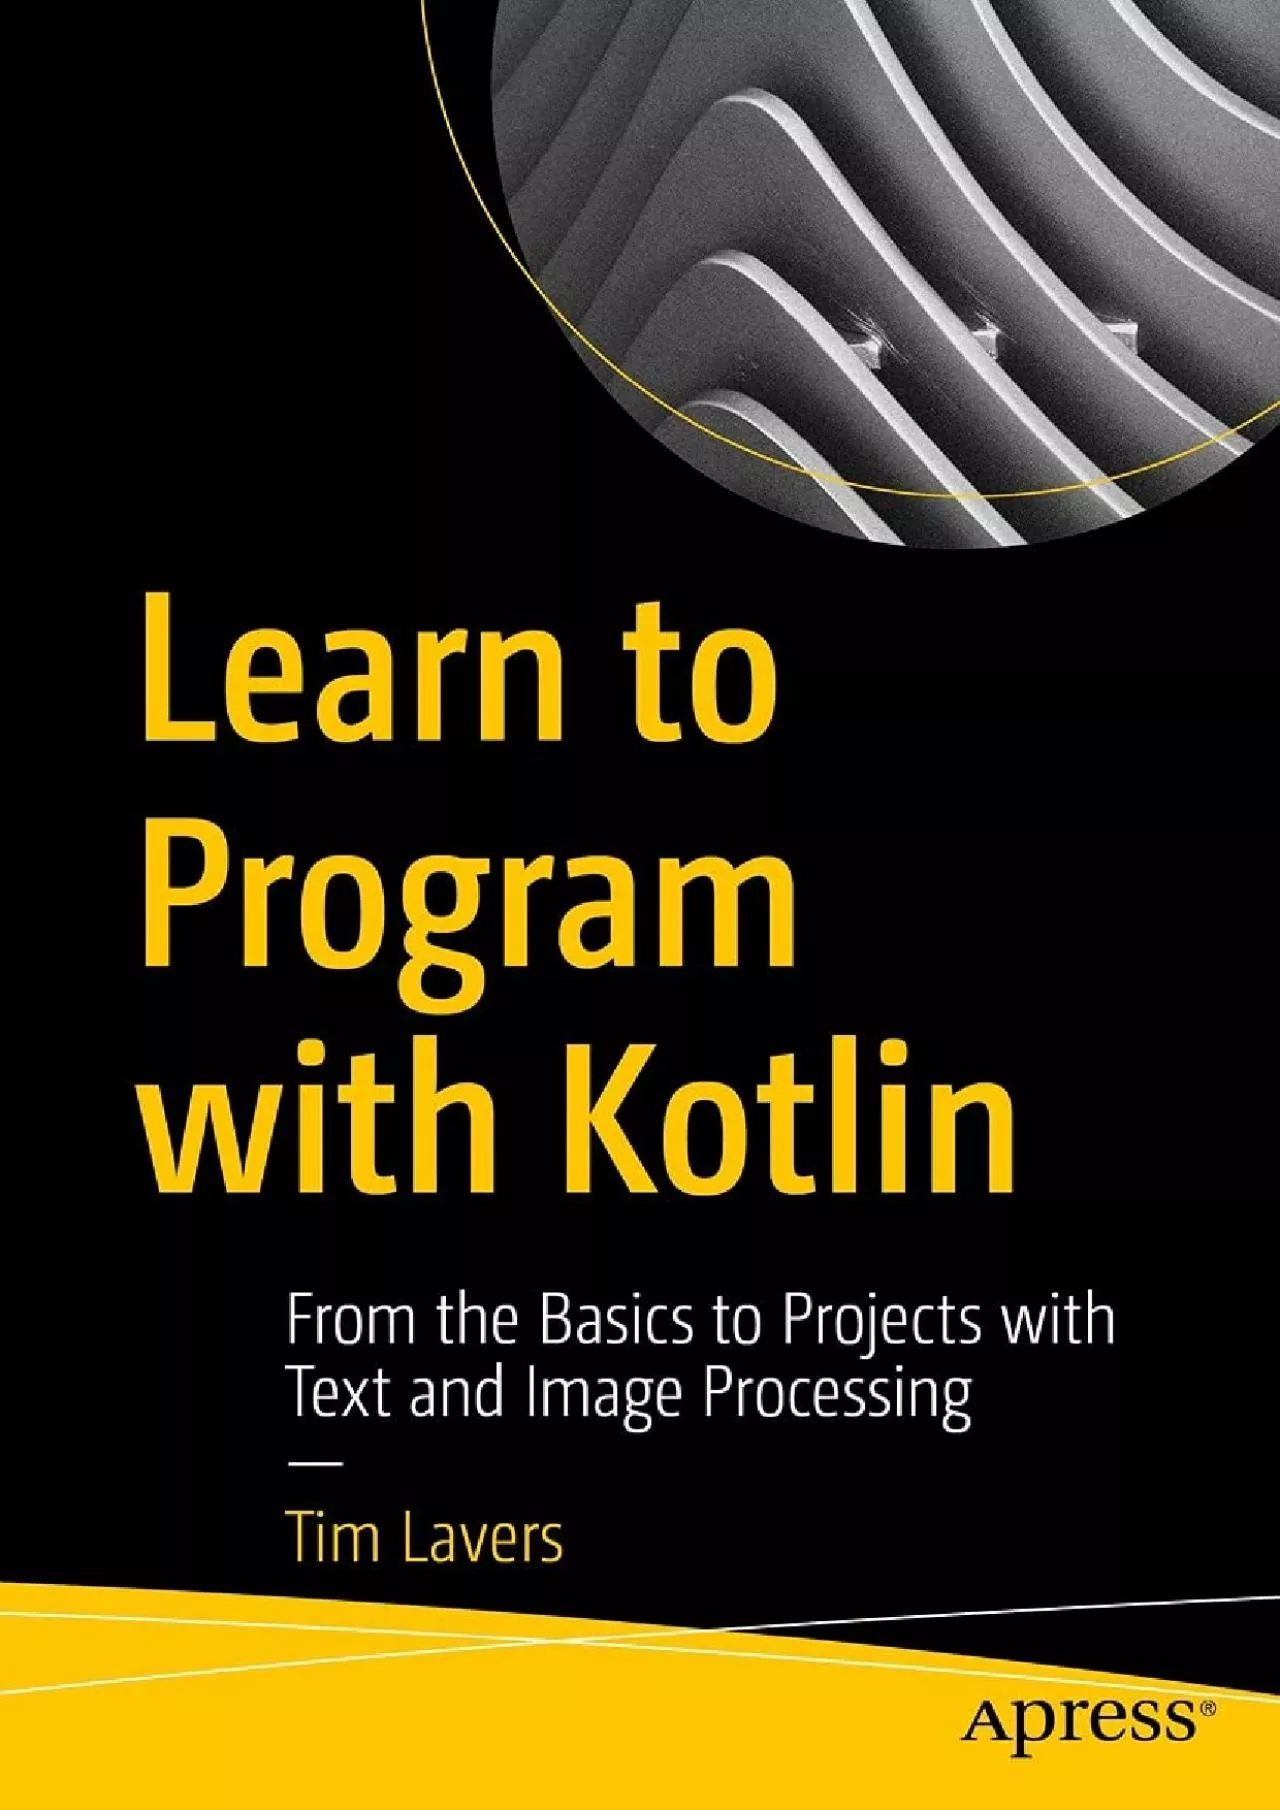 [READING BOOK]-Learn to Program with Kotlin: From the Basics to Projects with Text and